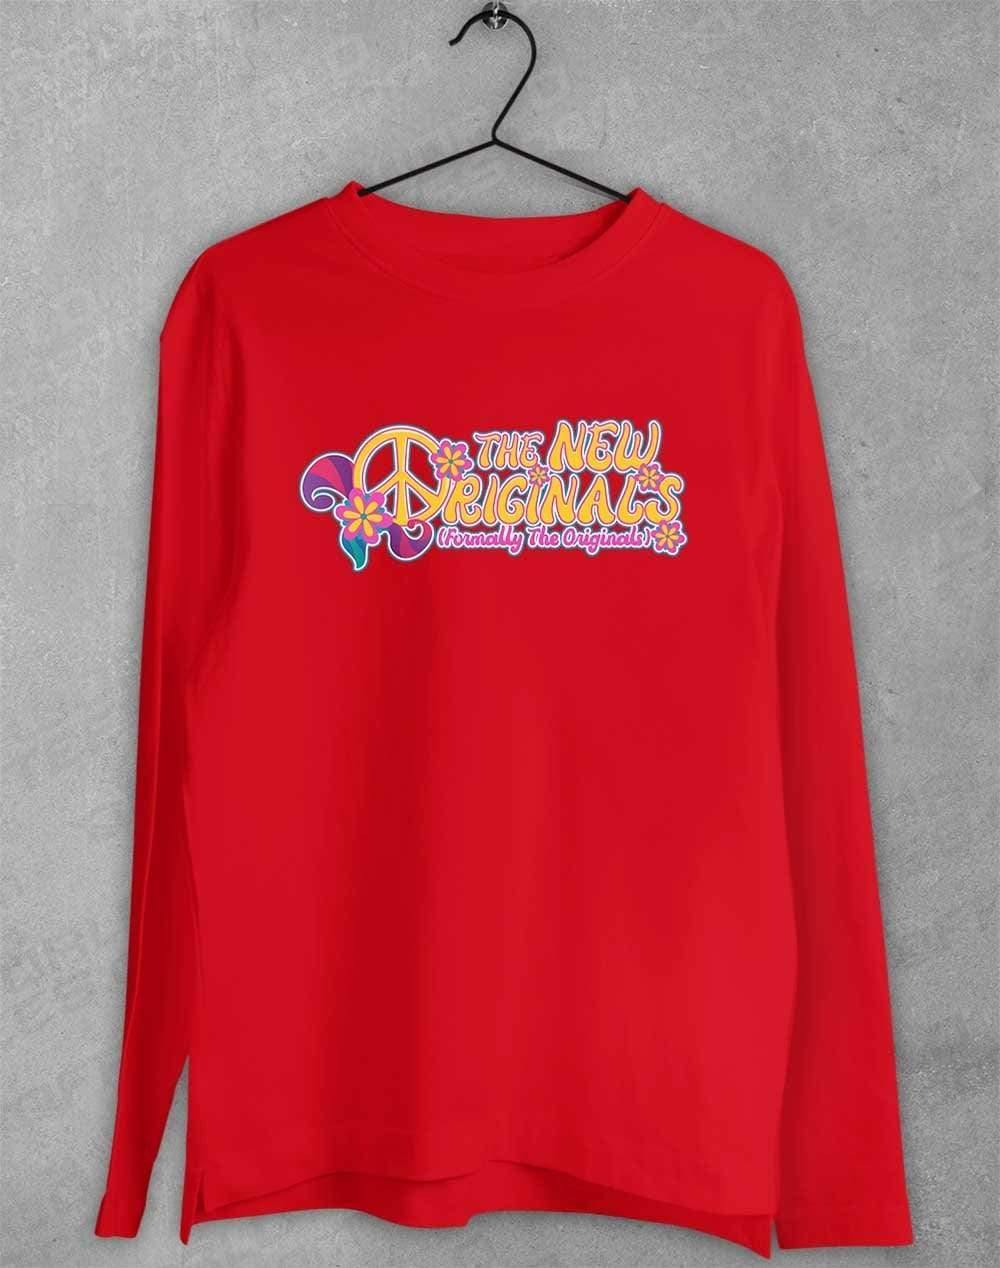 The New Originals Long Sleeve T-Shirt S / Red  - Off World Tees